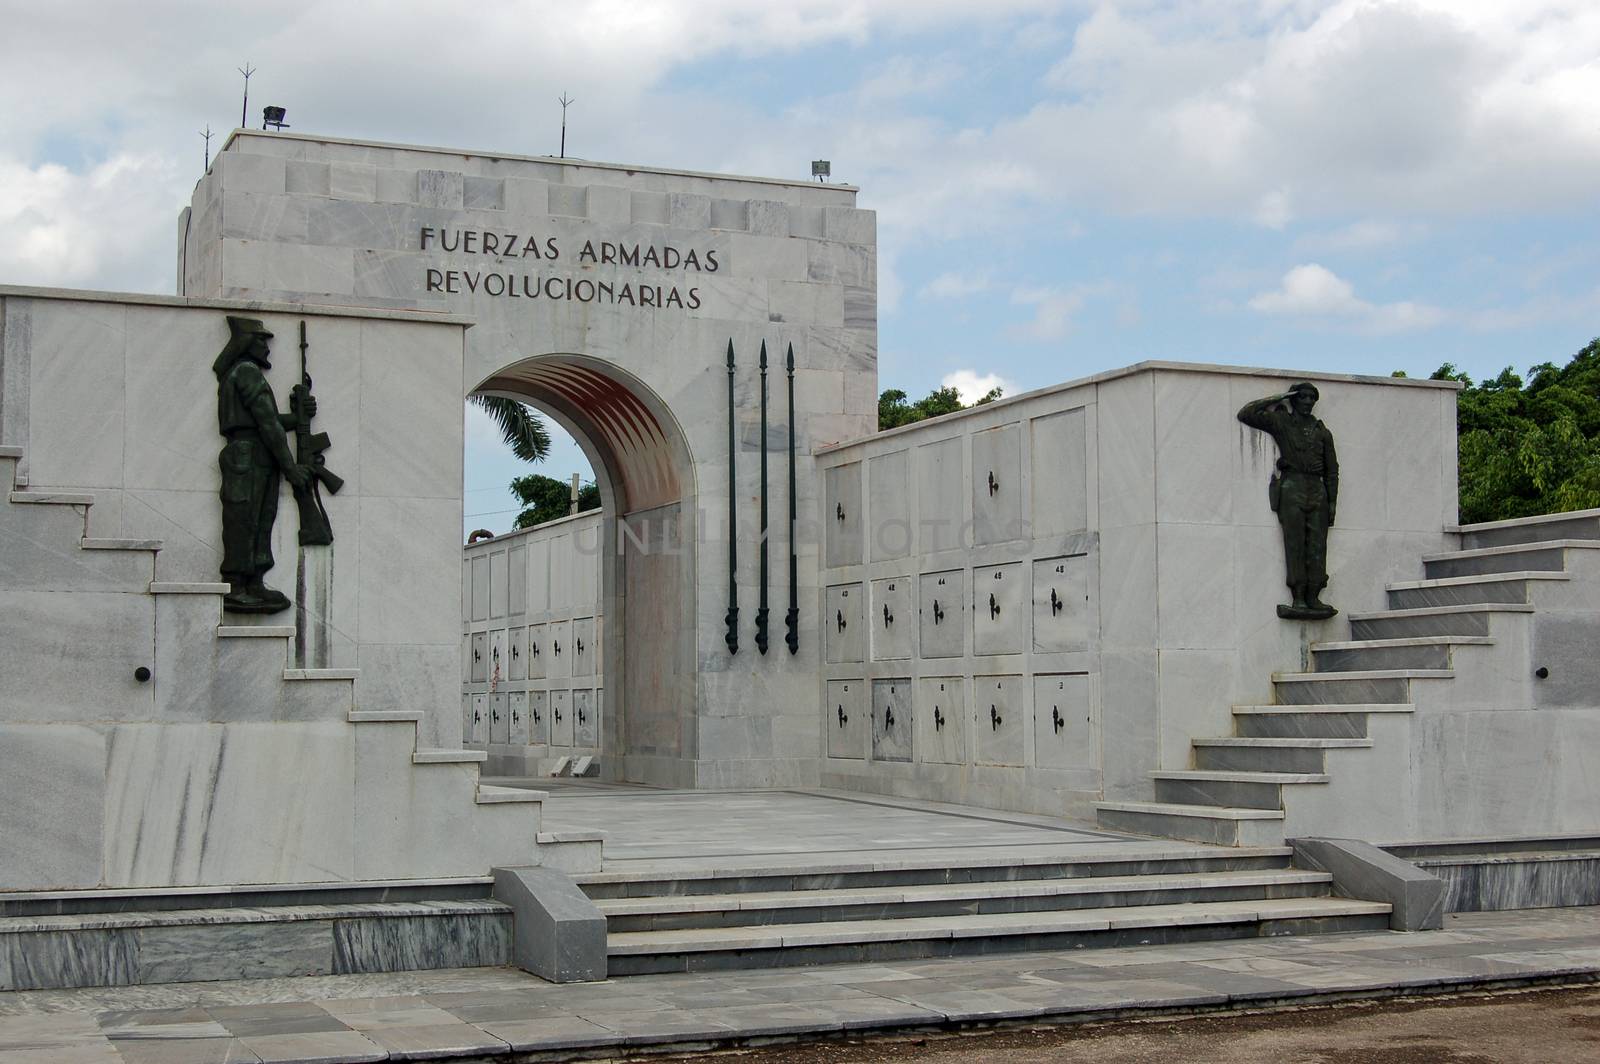 Tombs and Memorial for dead Communist revolutionary soldiers in the Colon Cemetery, Havana, Cuba.